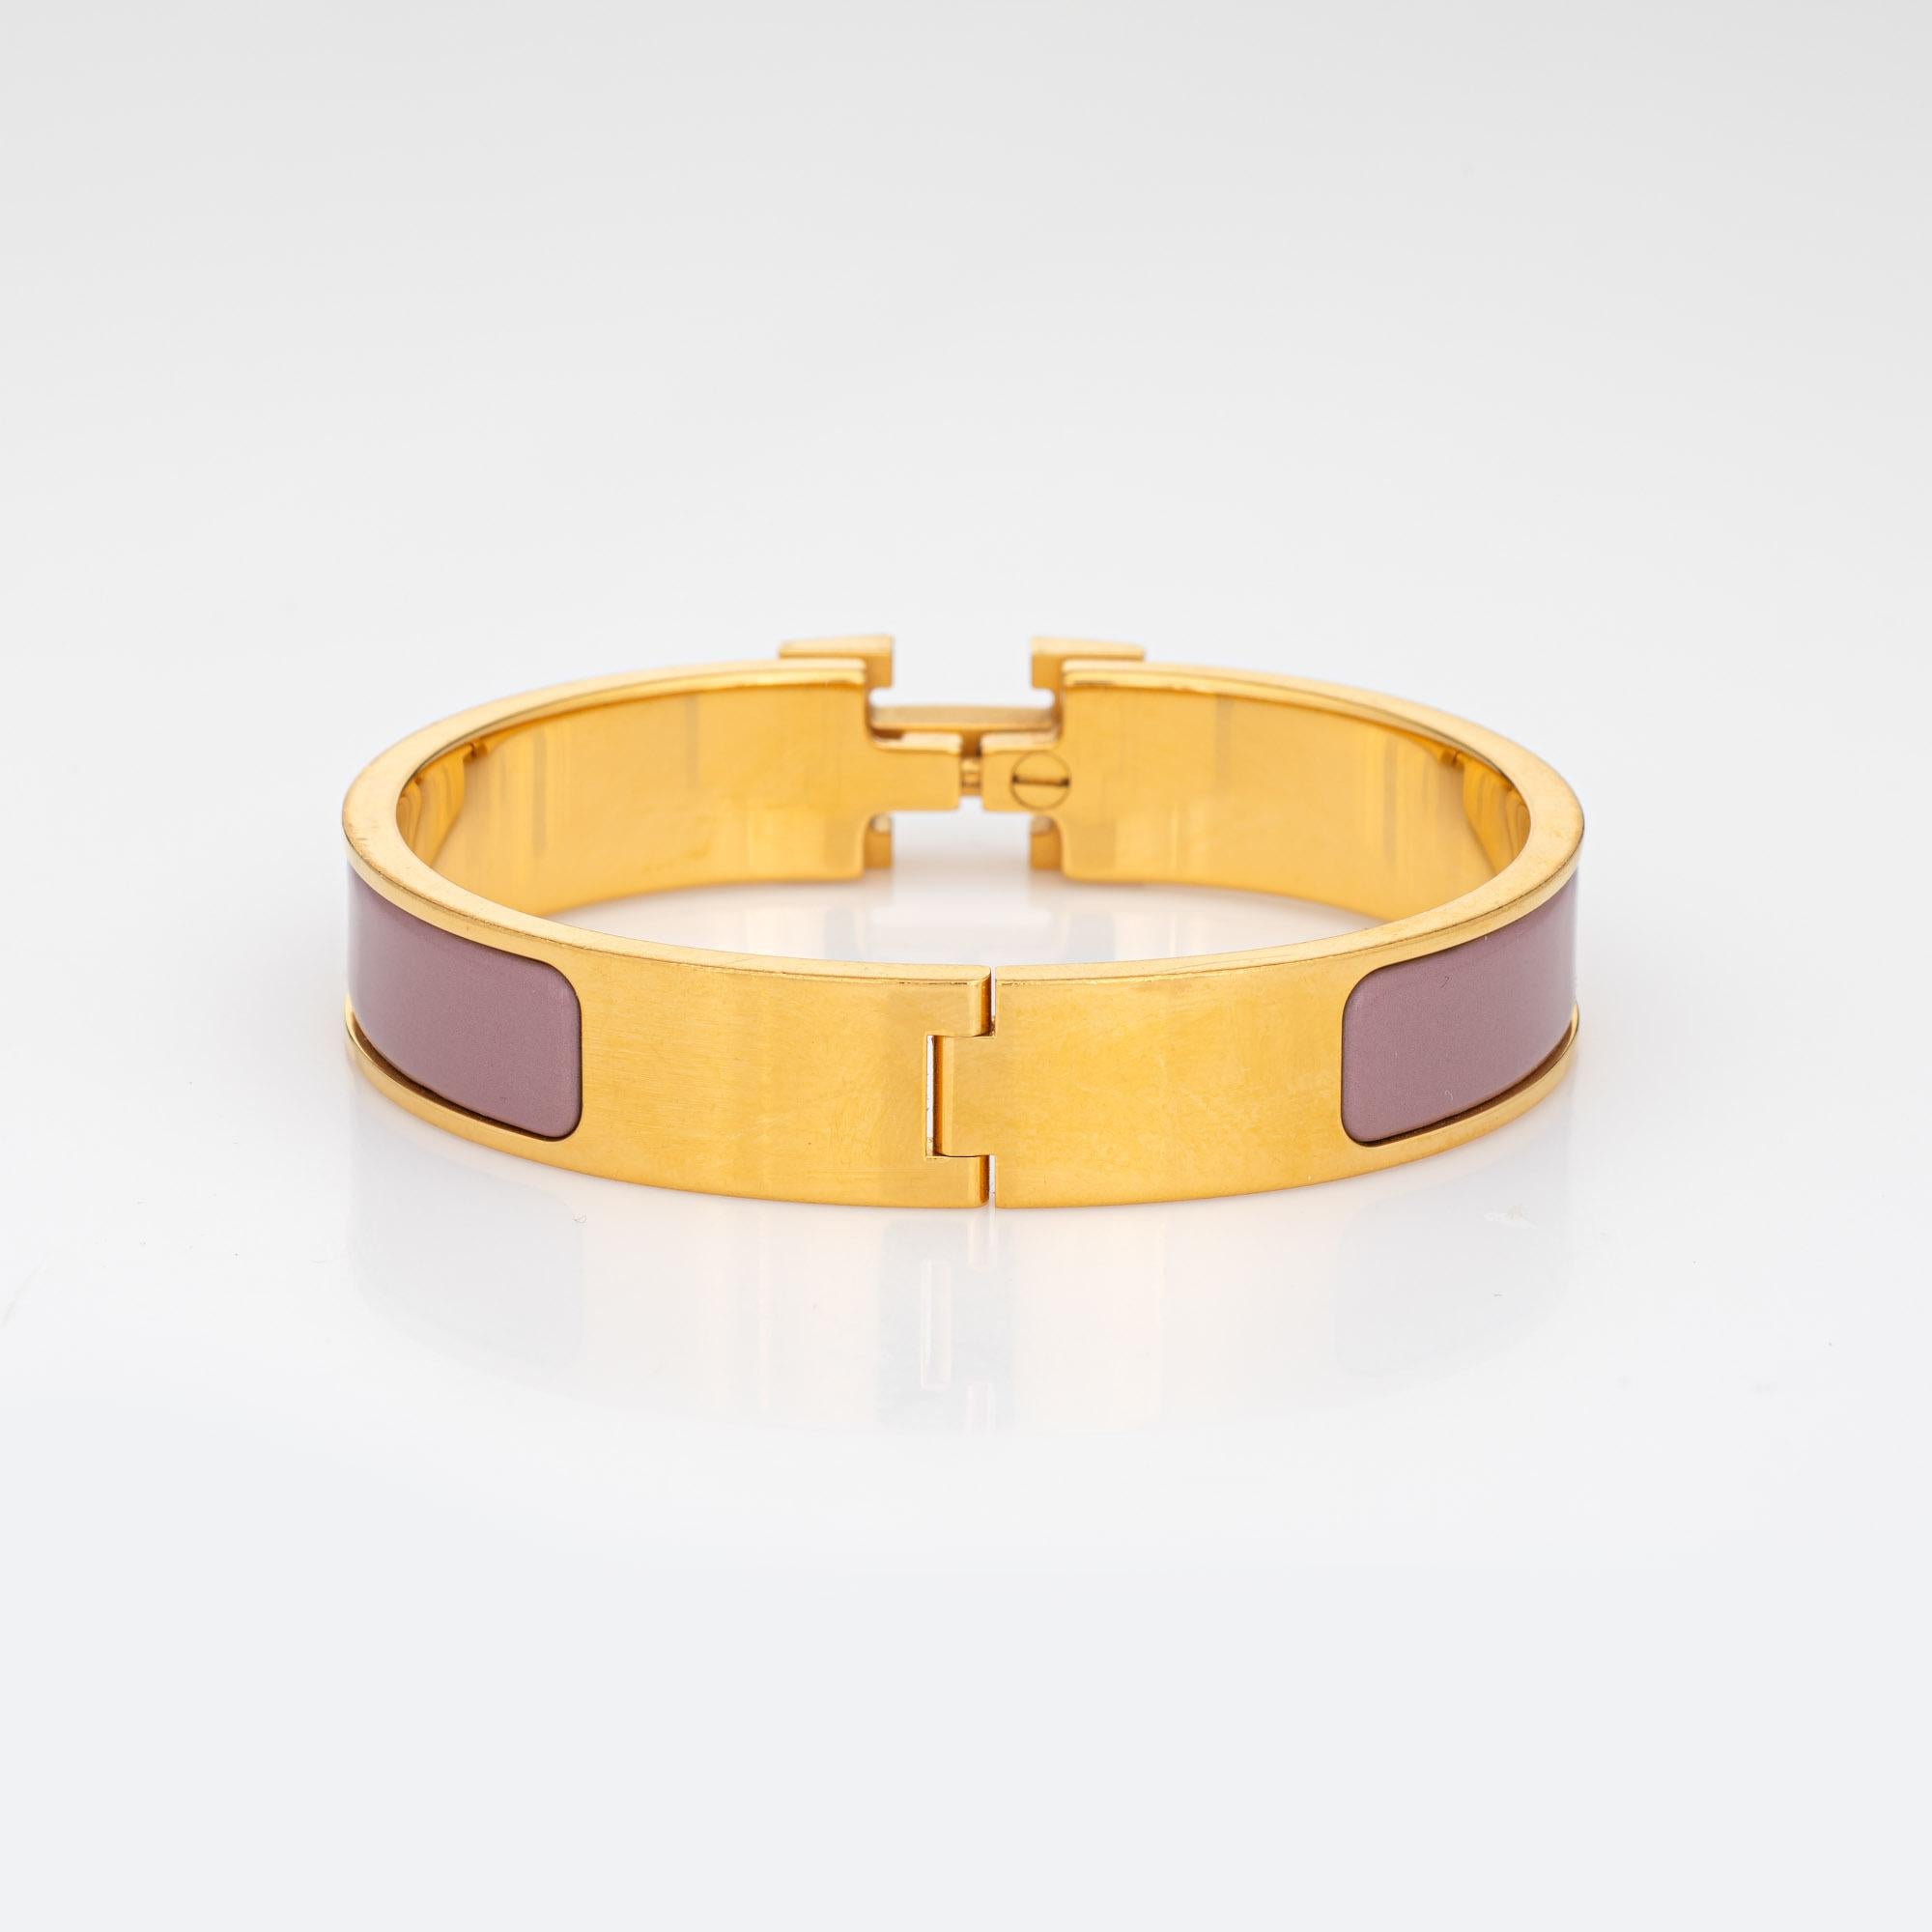 Pre-owned Hermes clic clac bracelet (circa 2013). 

The narrow Hermes bracelet features purple mauve enamel detail and yellow gold plate. The H turnlock secures the bracelet onto the wrist. Dating to 2013, the bracelet is in very good condition